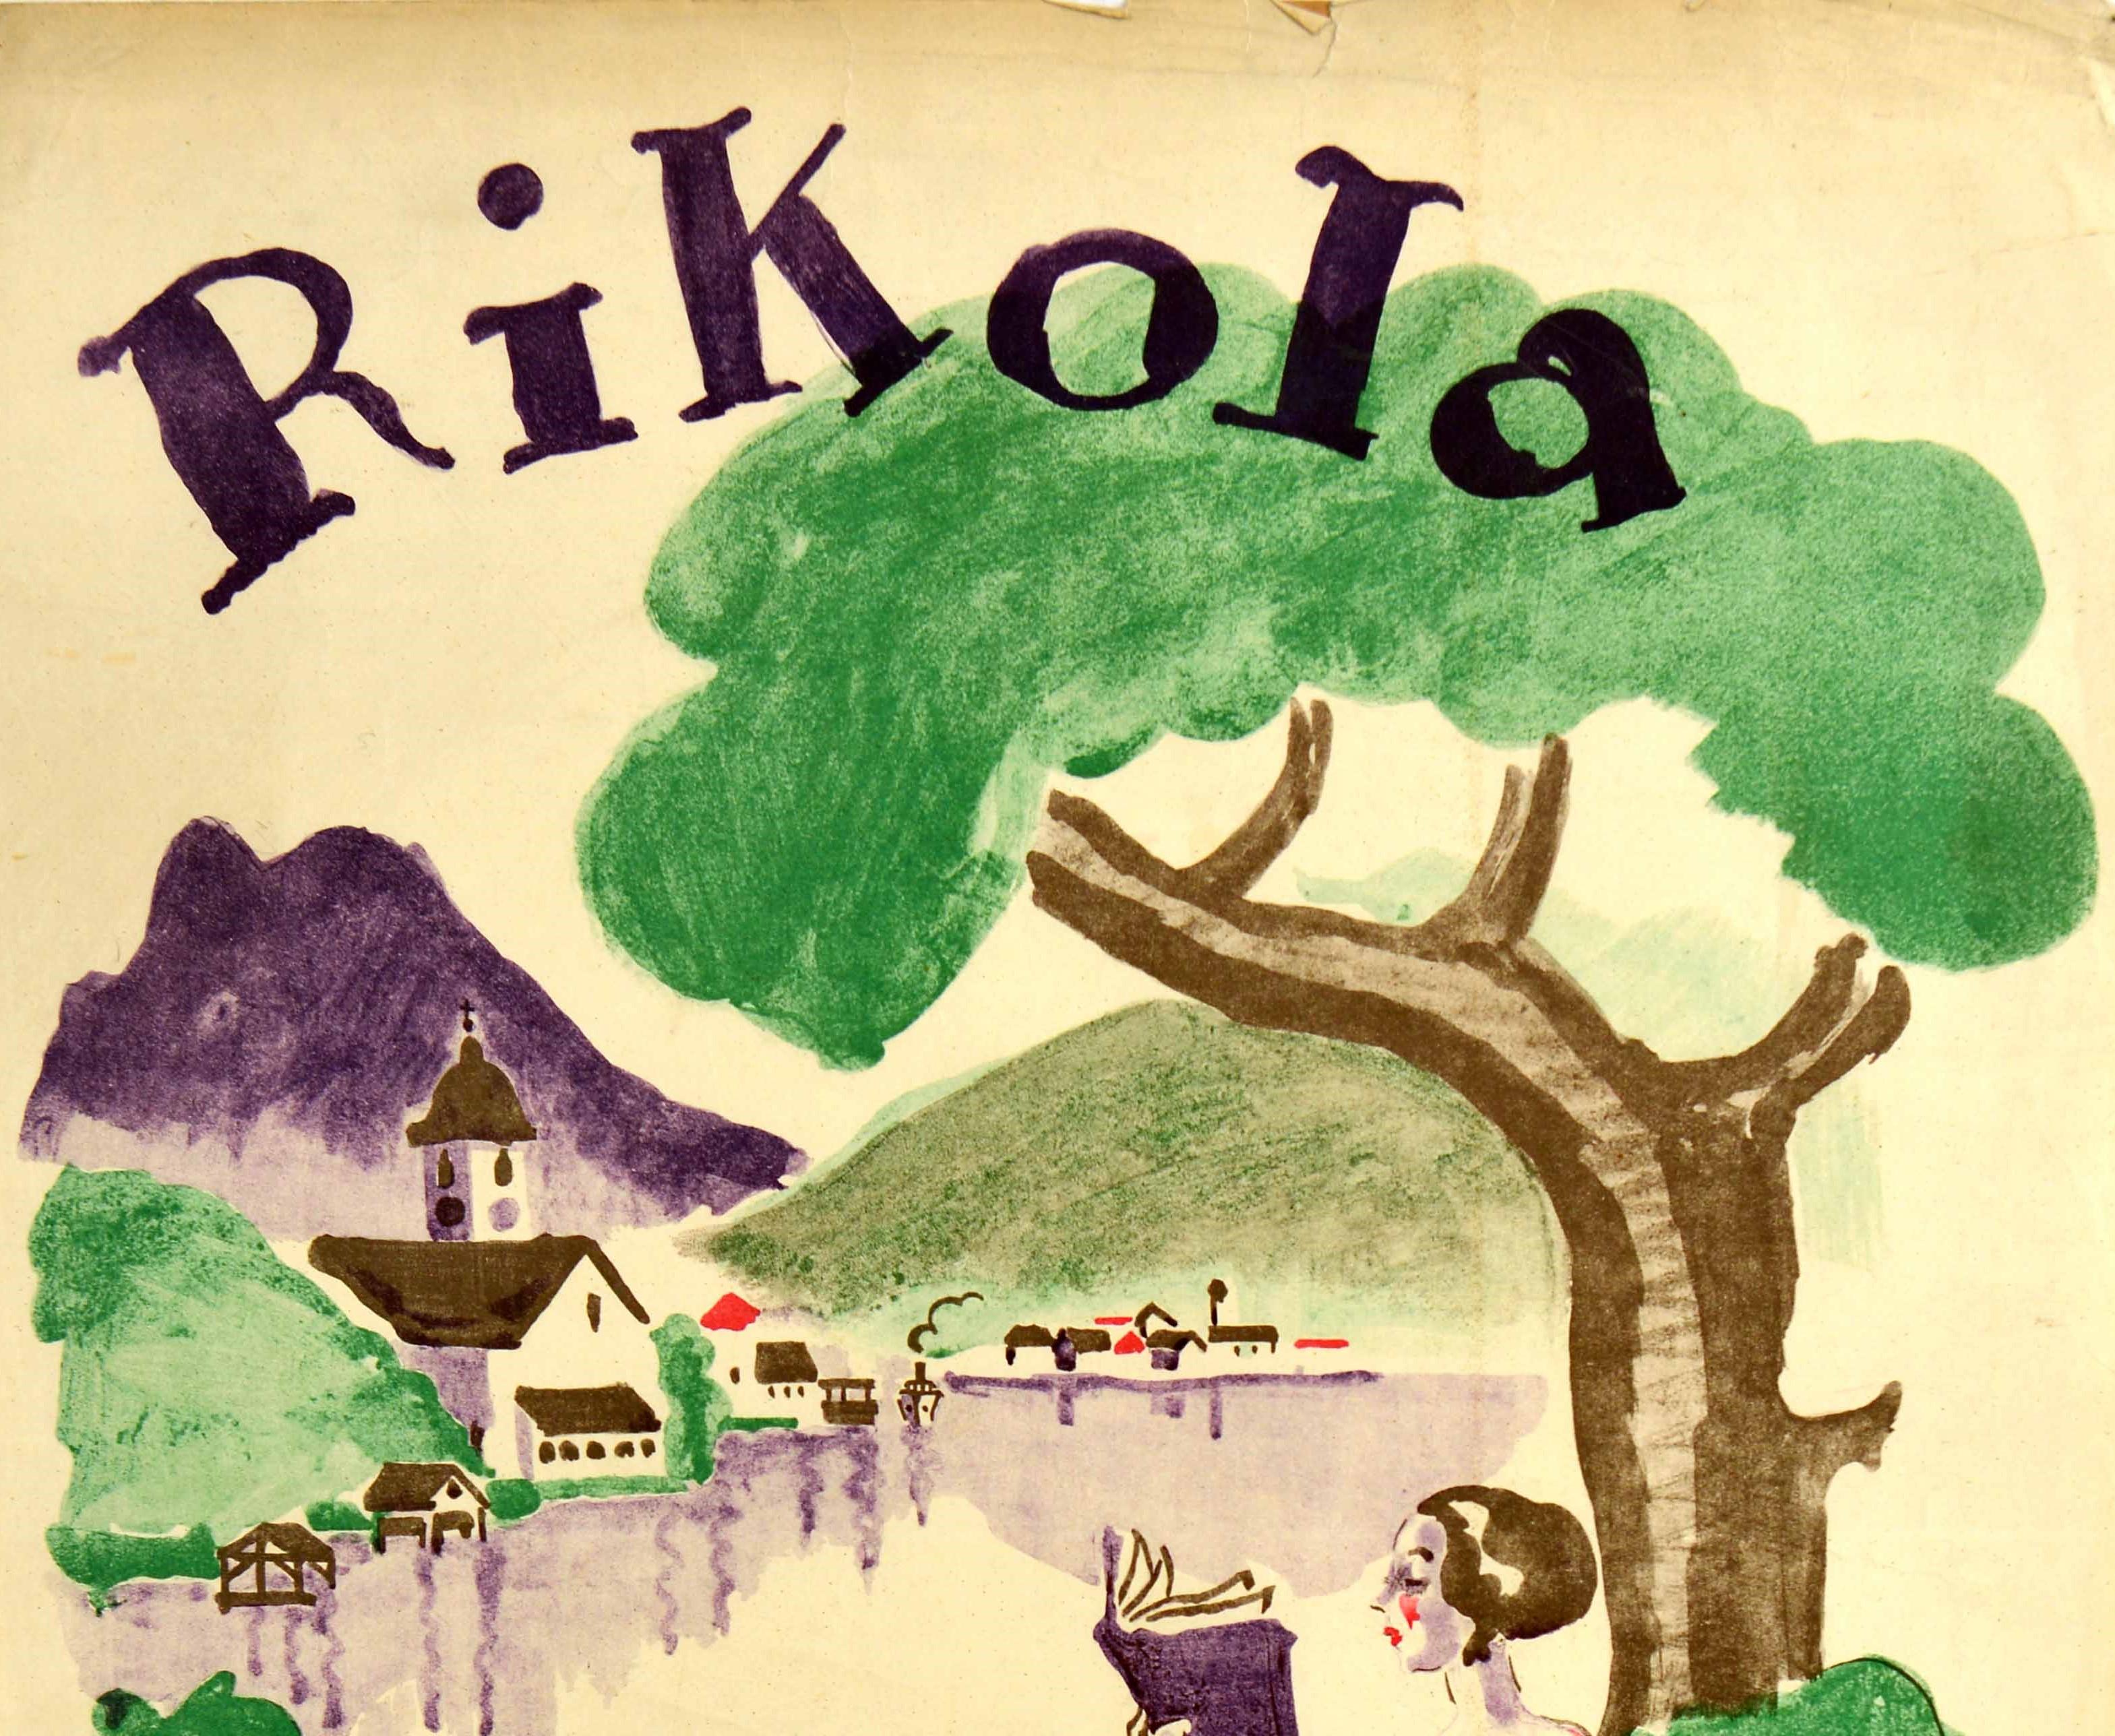 Original vintage advertising poster for Rikola Bucher / Rikola Books featuring colourful artwork of a lady relaxing in a red and white checked dress lying under a tree and reading a book with a village on the other side of the lake and hills on the